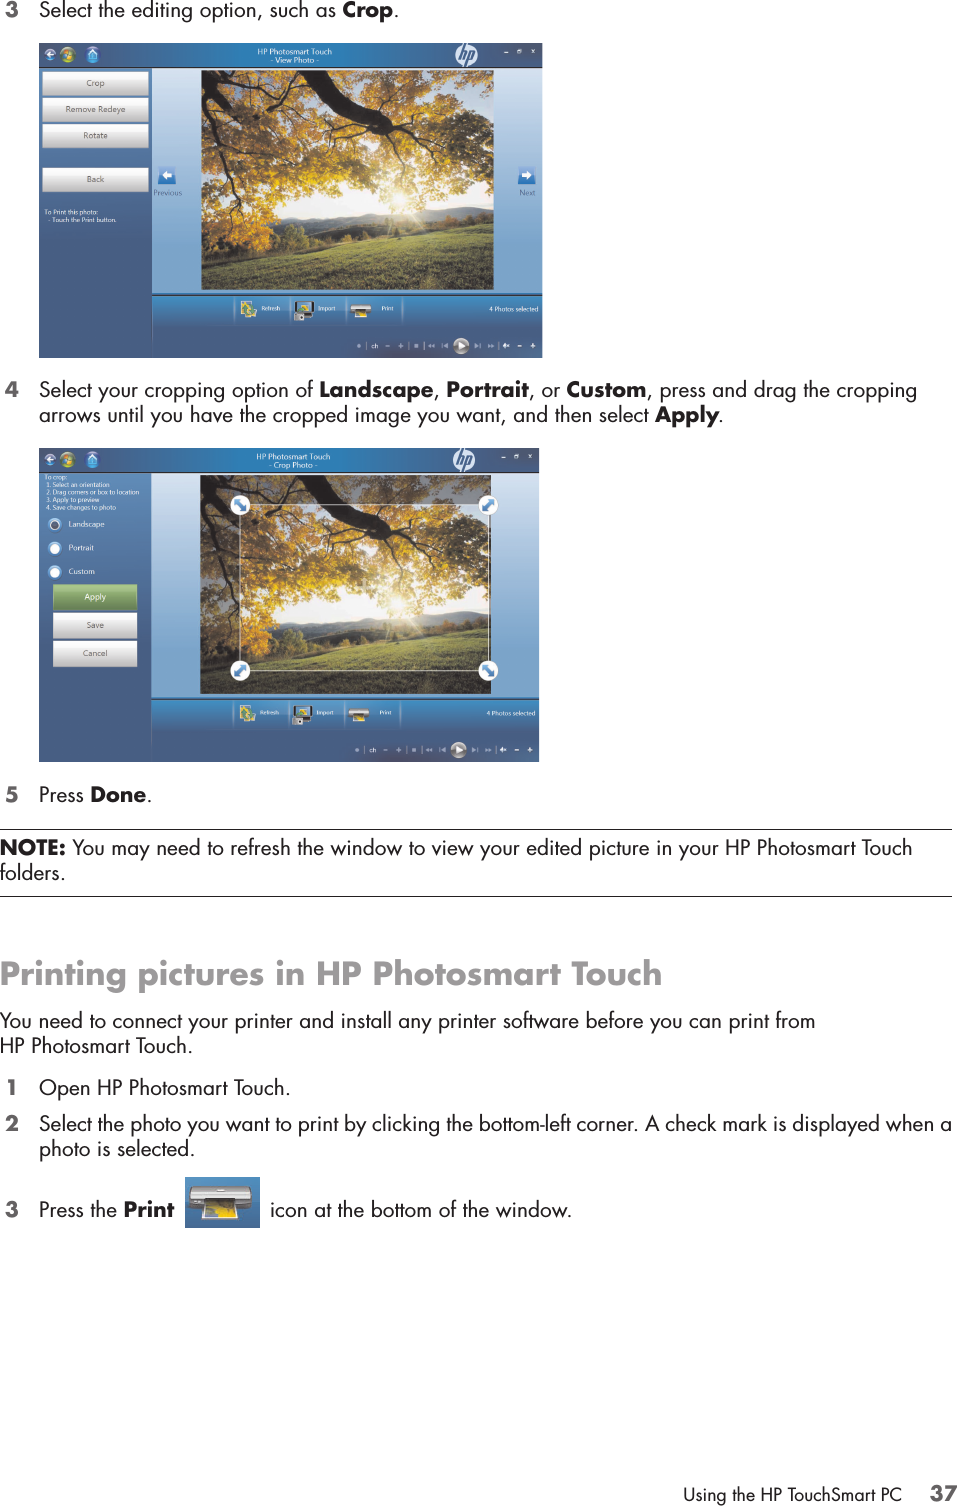 Using the HP TouchSmart PC 373Select the editing option, such as Crop. 4Select your cropping option of Landscape, Portrait, or Custom, press and drag the cropping arrows until you have the cropped image you want, and then select Apply.5Press Done.Printing pictures in HP Photosmart TouchYou need to connect your printer and install any printer software before you can print from HP Photosmart Touch.1Open HP Photosmart Touch.2Select the photo you want to print by clicking the bottom-left corner. A check mark is displayed when a photo is selected.3Press the Print   icon at the bottom of the window.NOTE: You may need to refresh the window to view your edited picture in your HP Photosmart Touch folders.